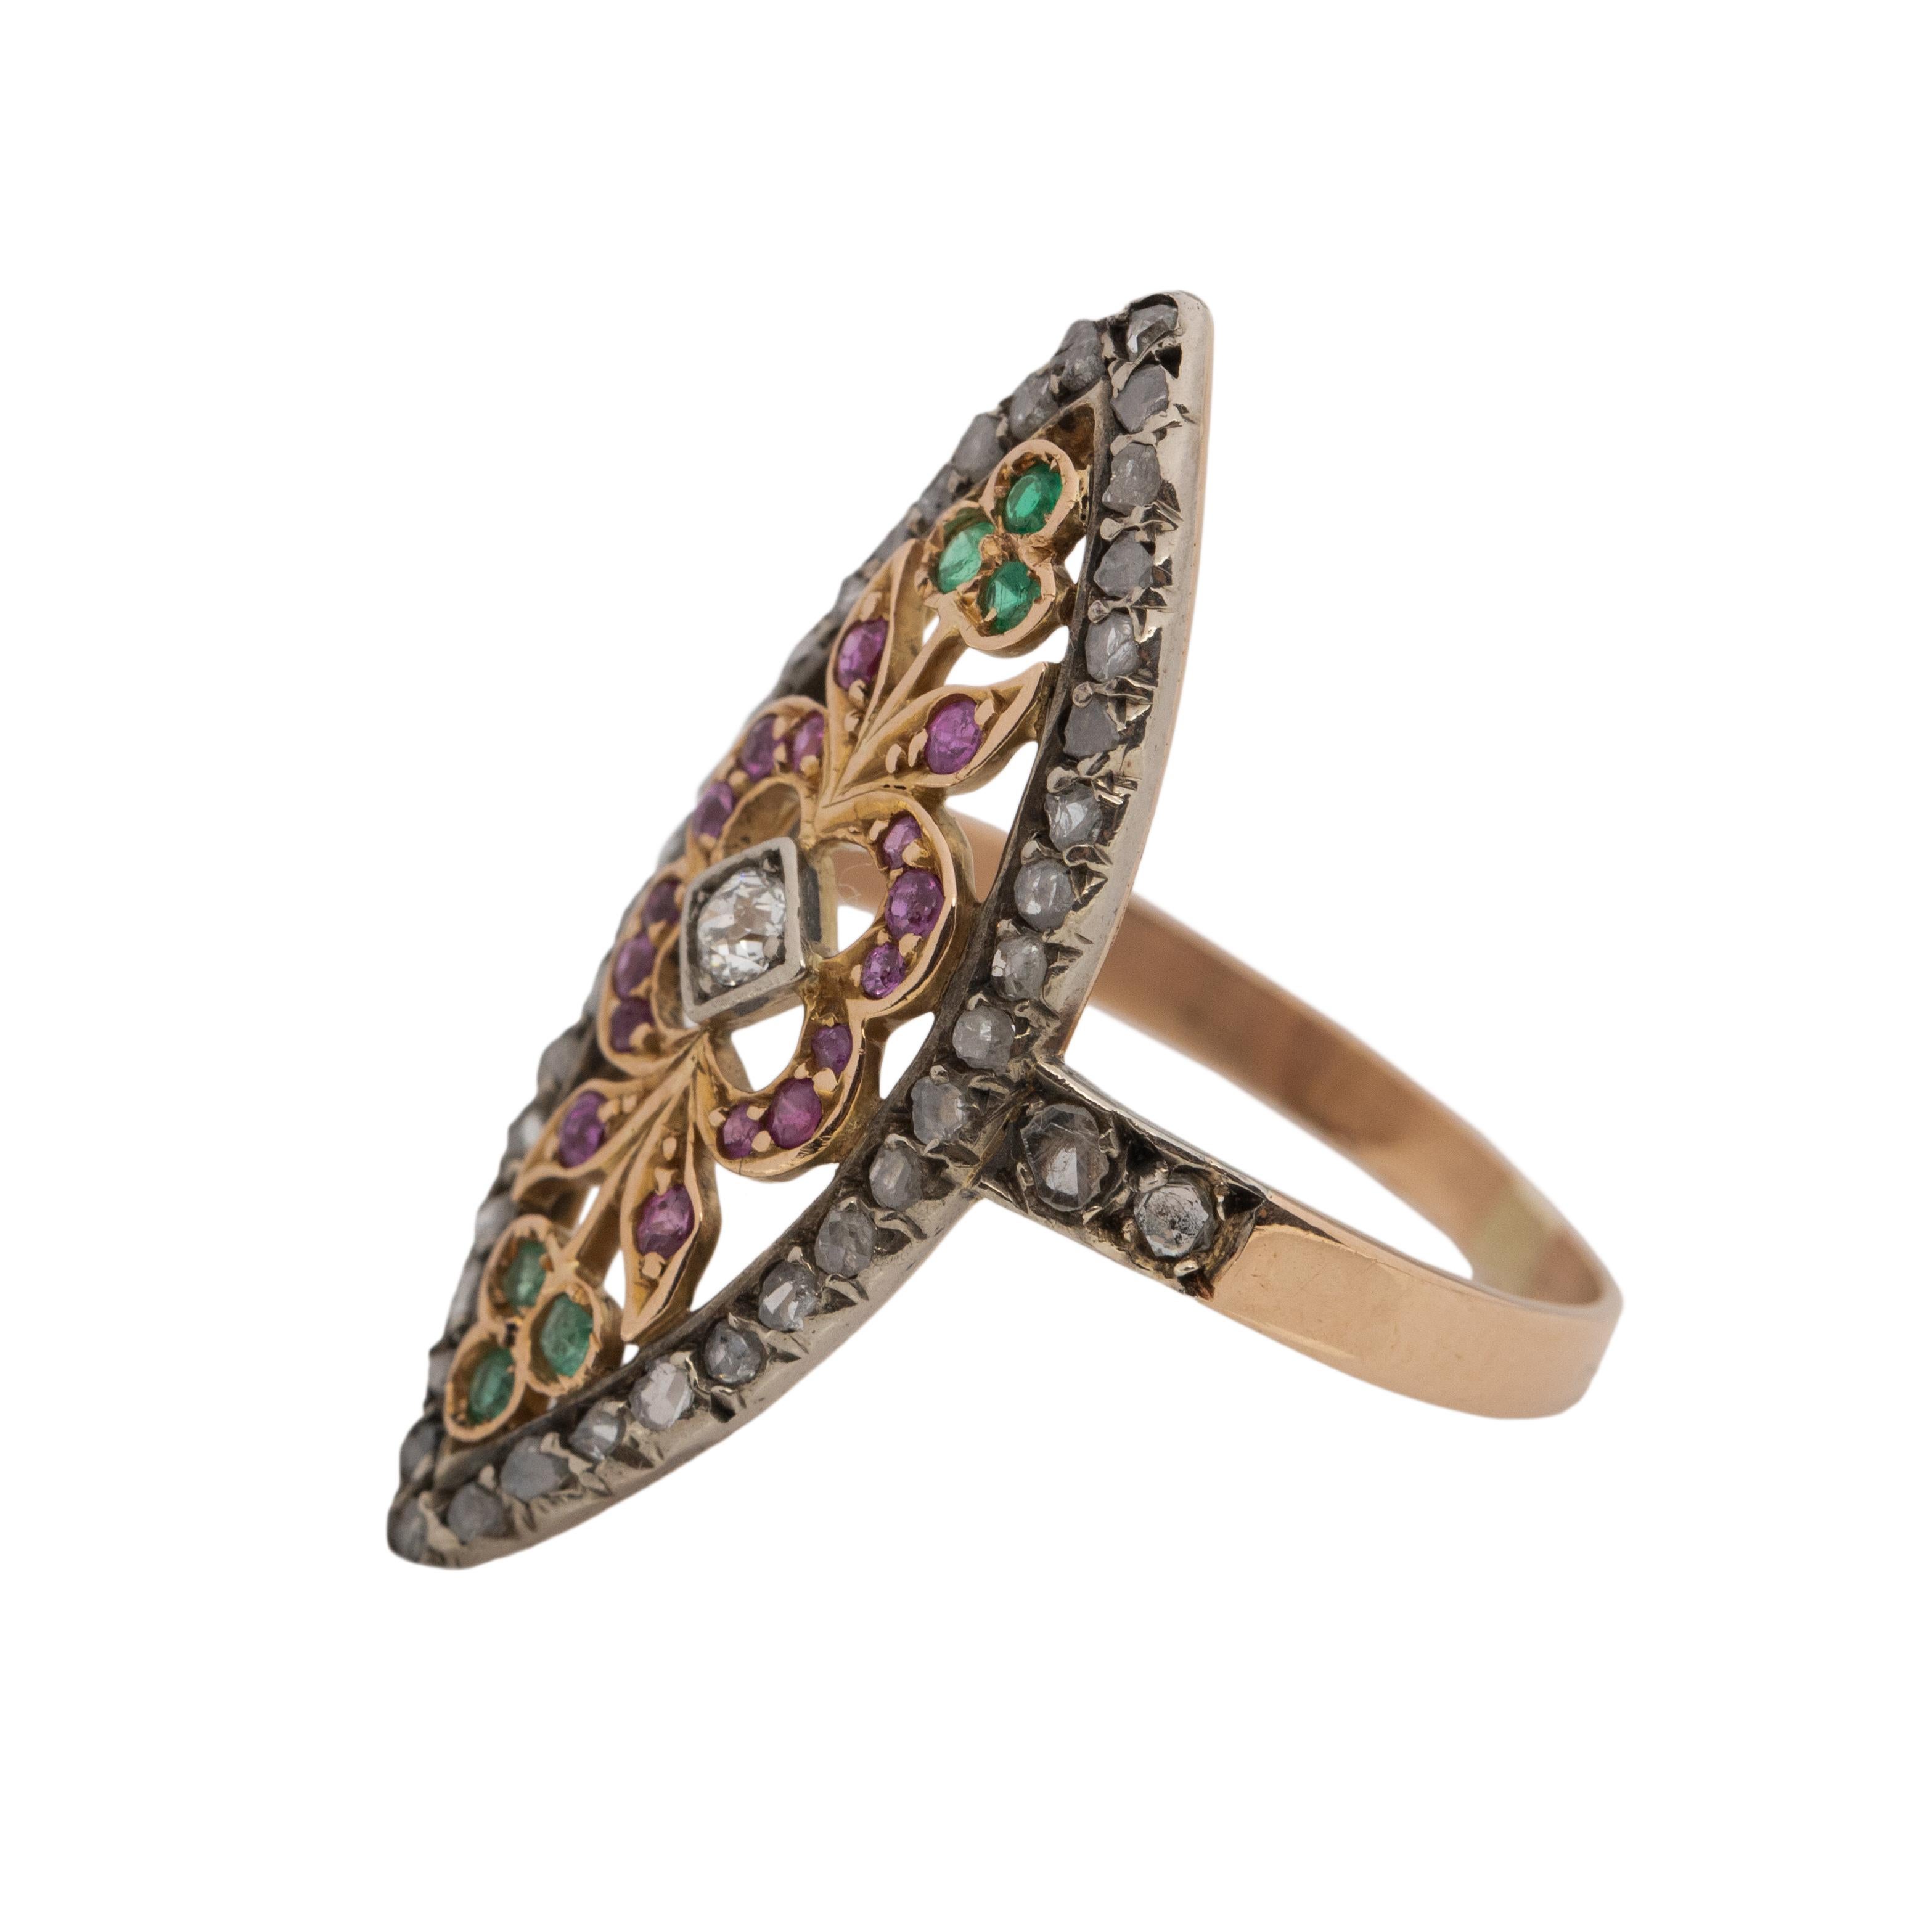 This Victorian piece is full of color, and is classically designed for its era. The simple smooth shanks hold the elongated Navette shape, surrounding the design are rose cut diamonds set in white gold. In the center of the diamonds is a yellow gold